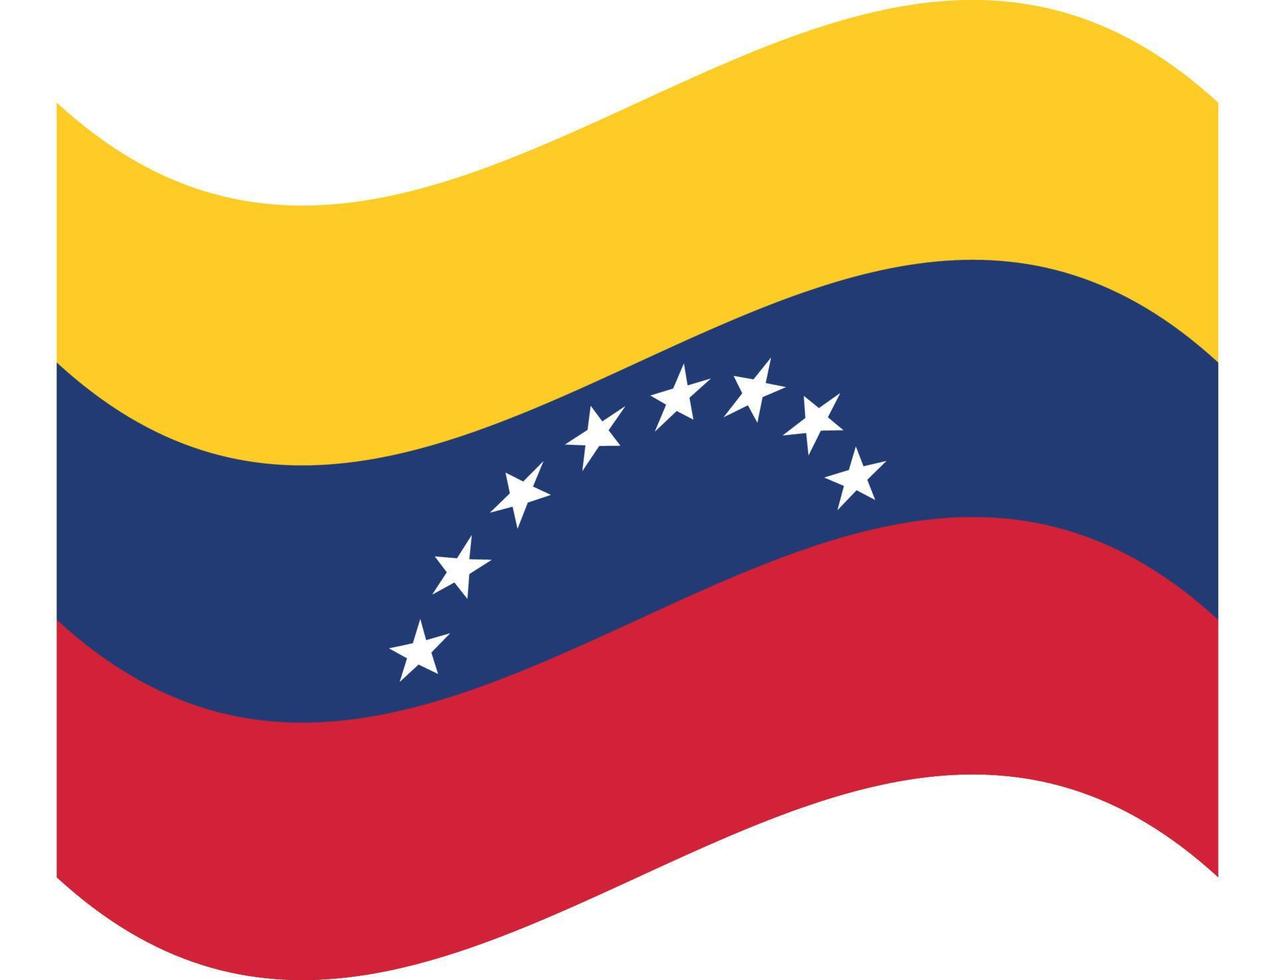 Flag of Venezuela. Civil variant. Accurate dimensions, element proportions and colors. vector